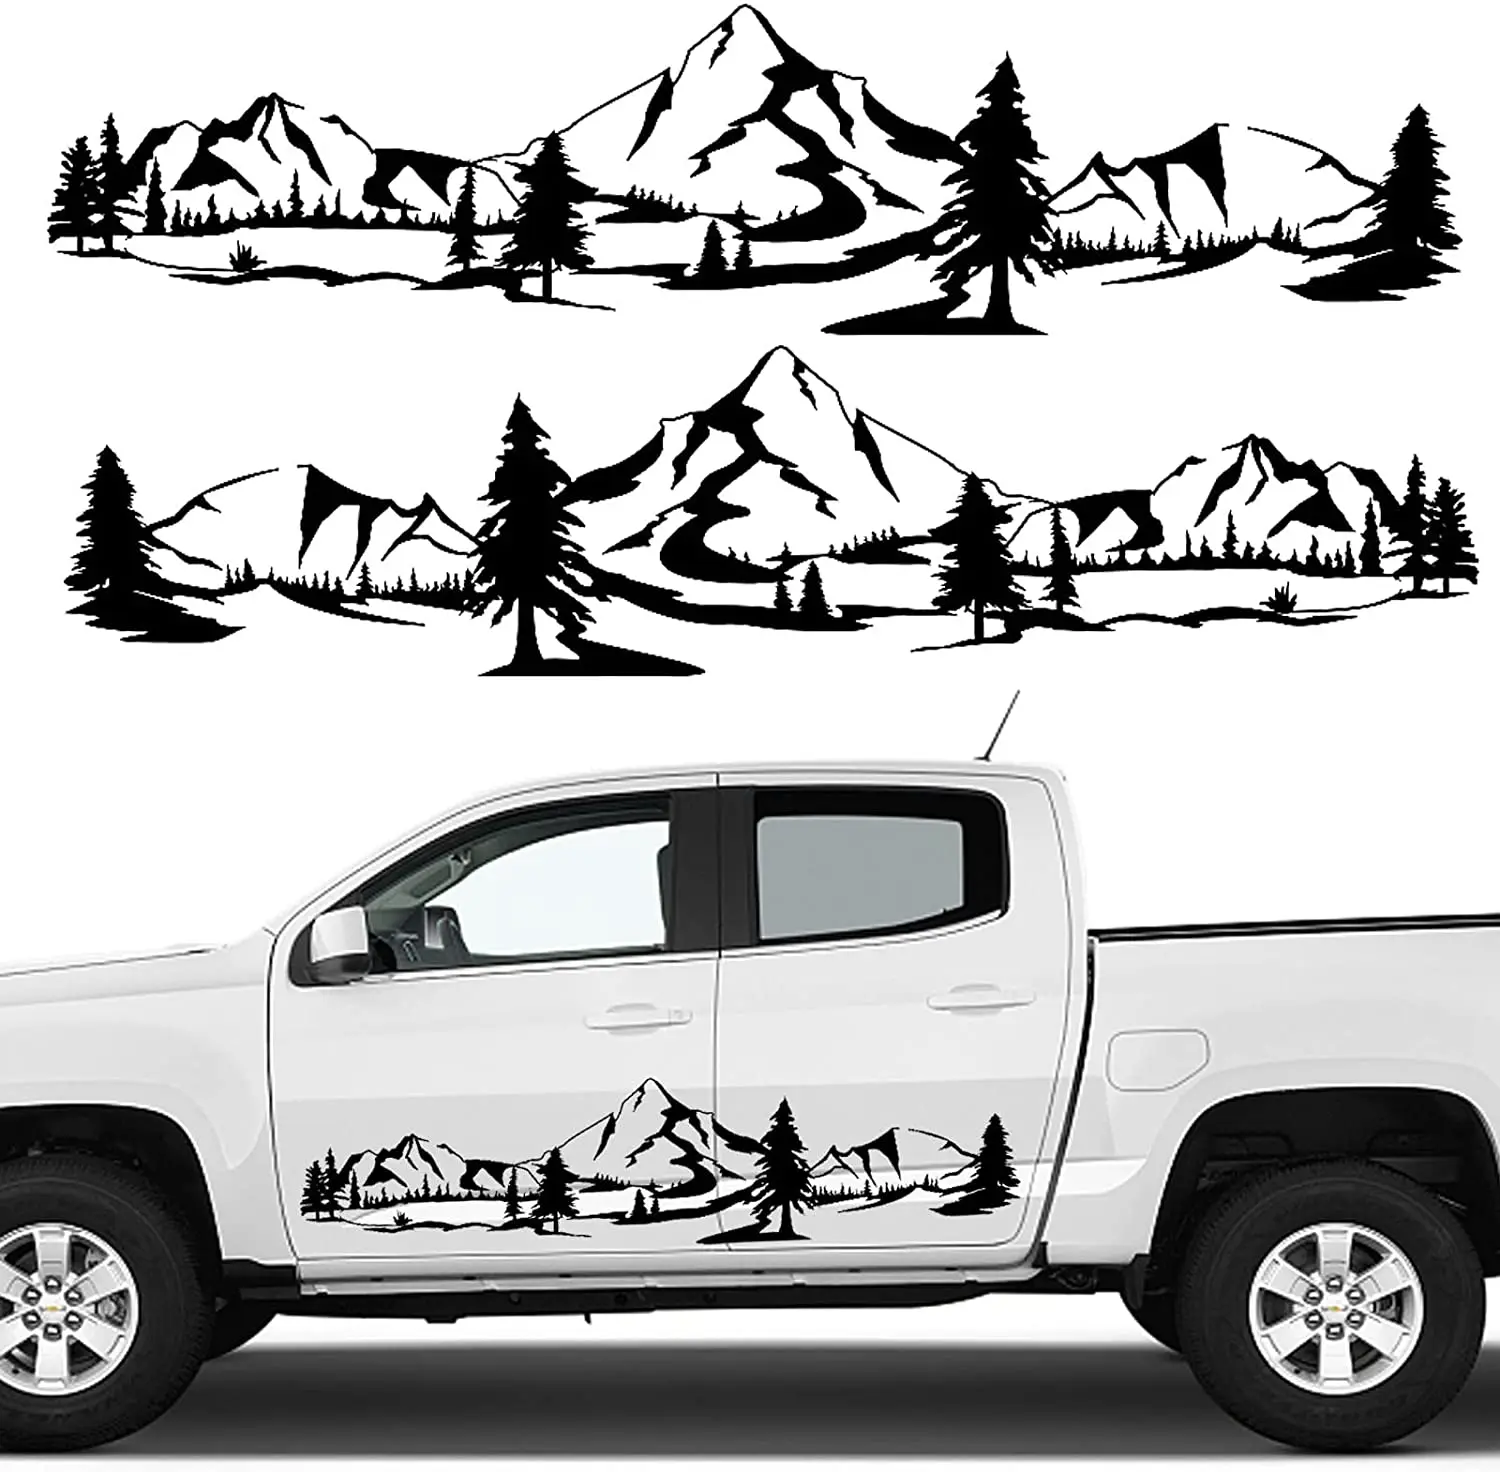 

Fochutech Truck Stickers and Decals, Large Mountains Car Side Stickers for Truck Pickup SUV, Forests Tree Graphics Vinyl Sticker